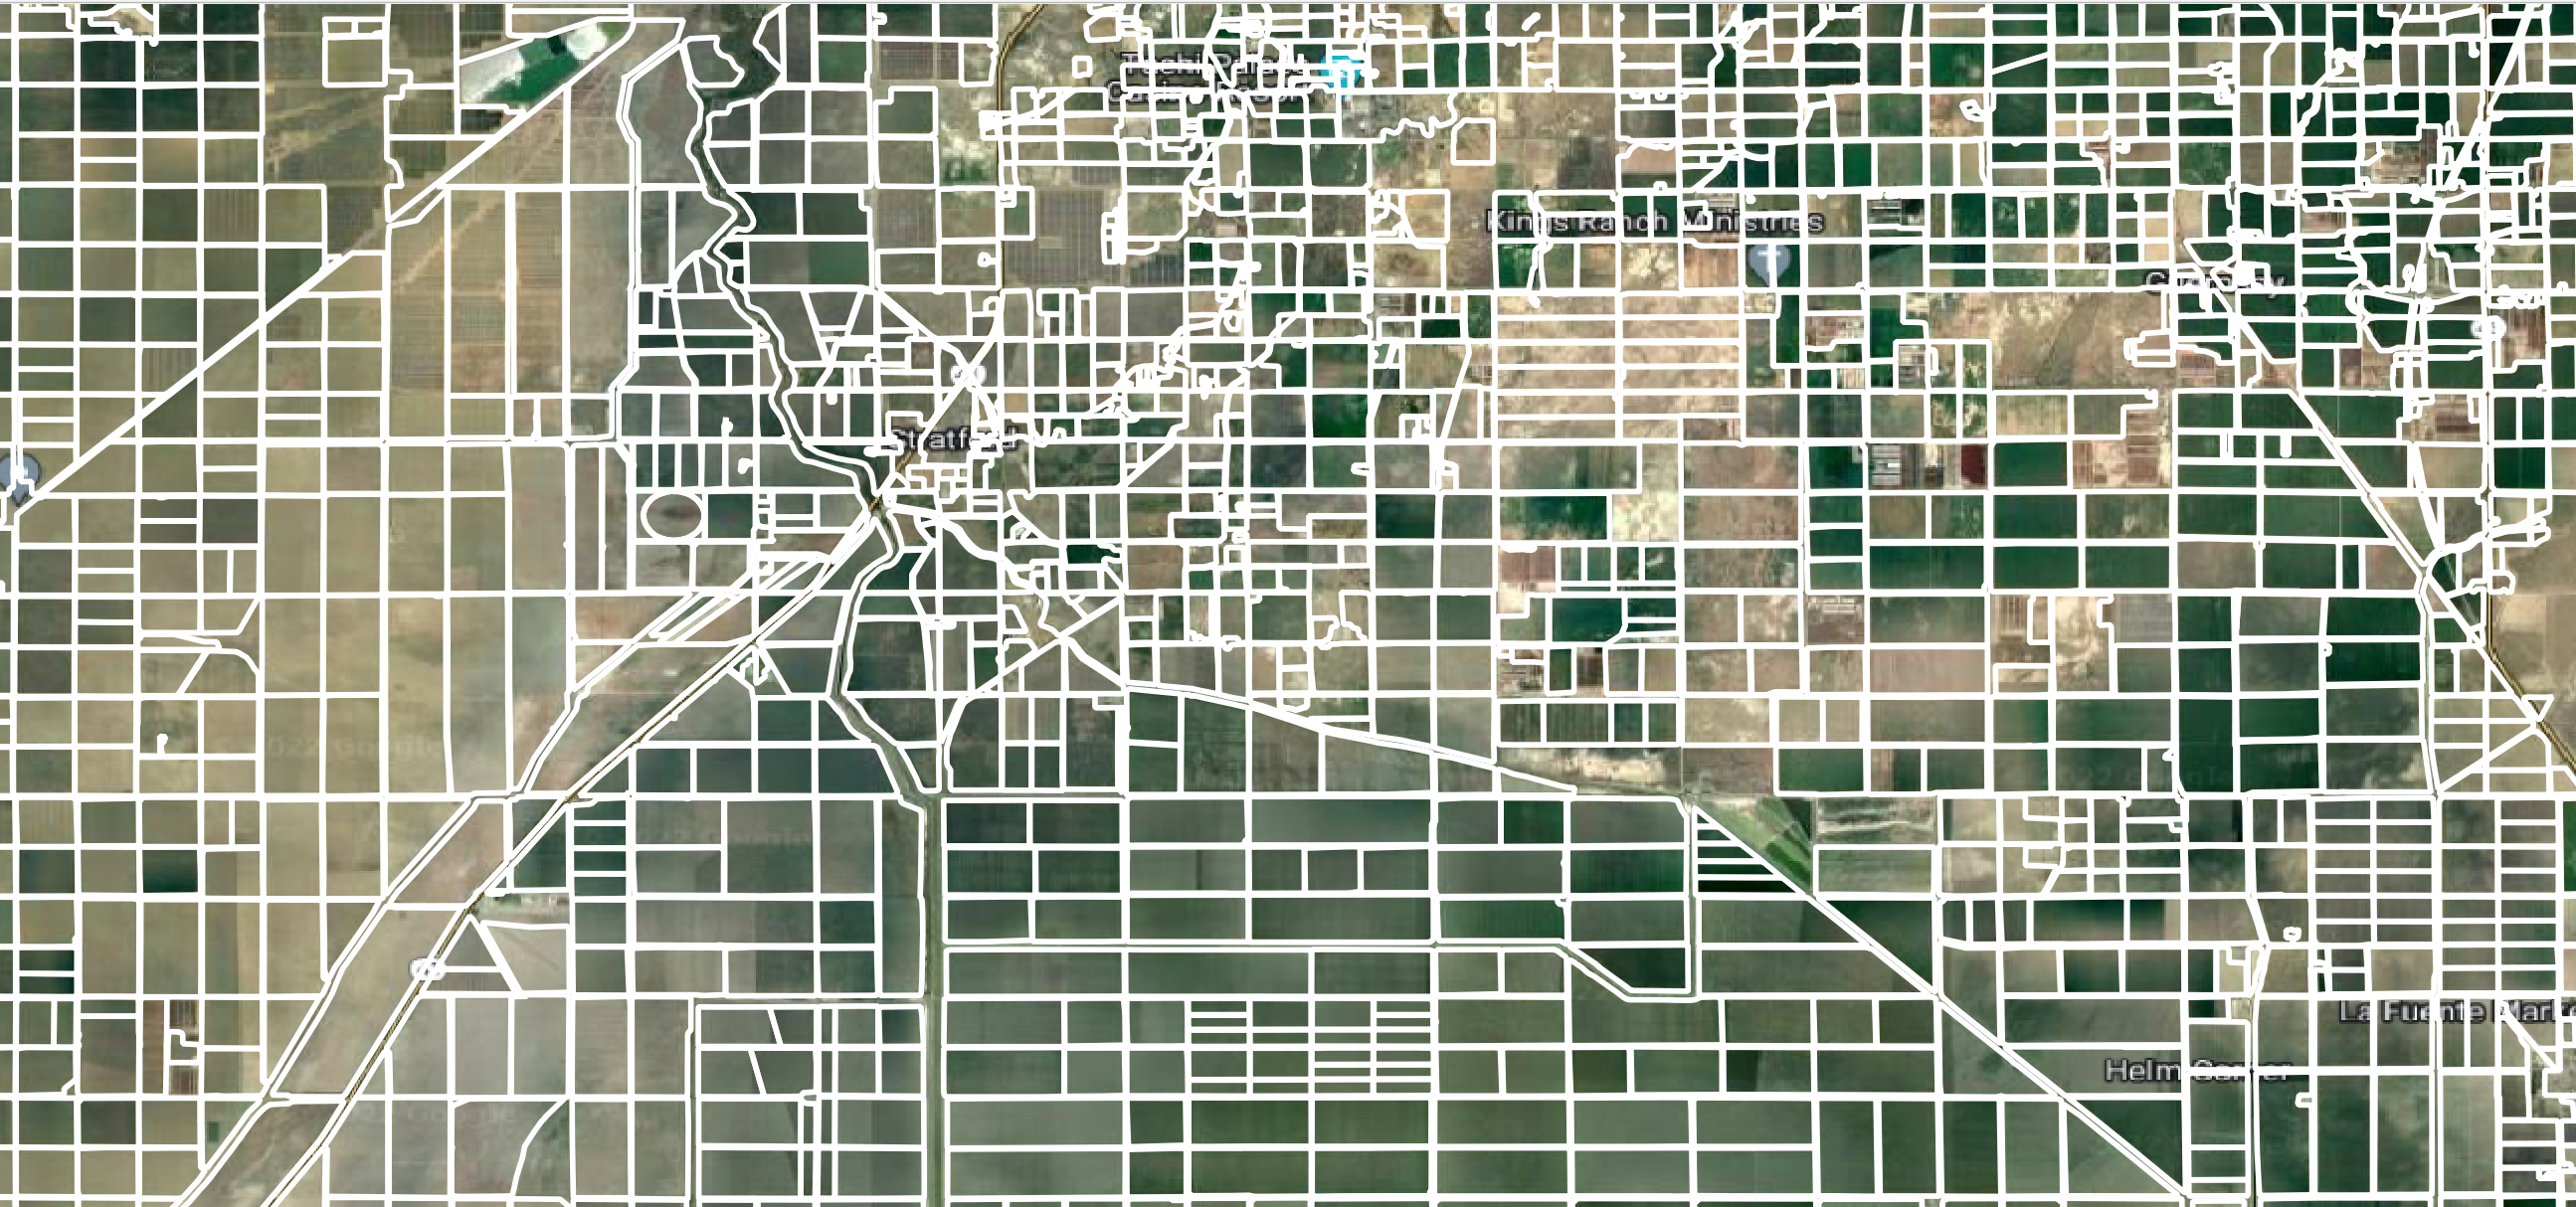 Crop-Field-Delineation-USA.png